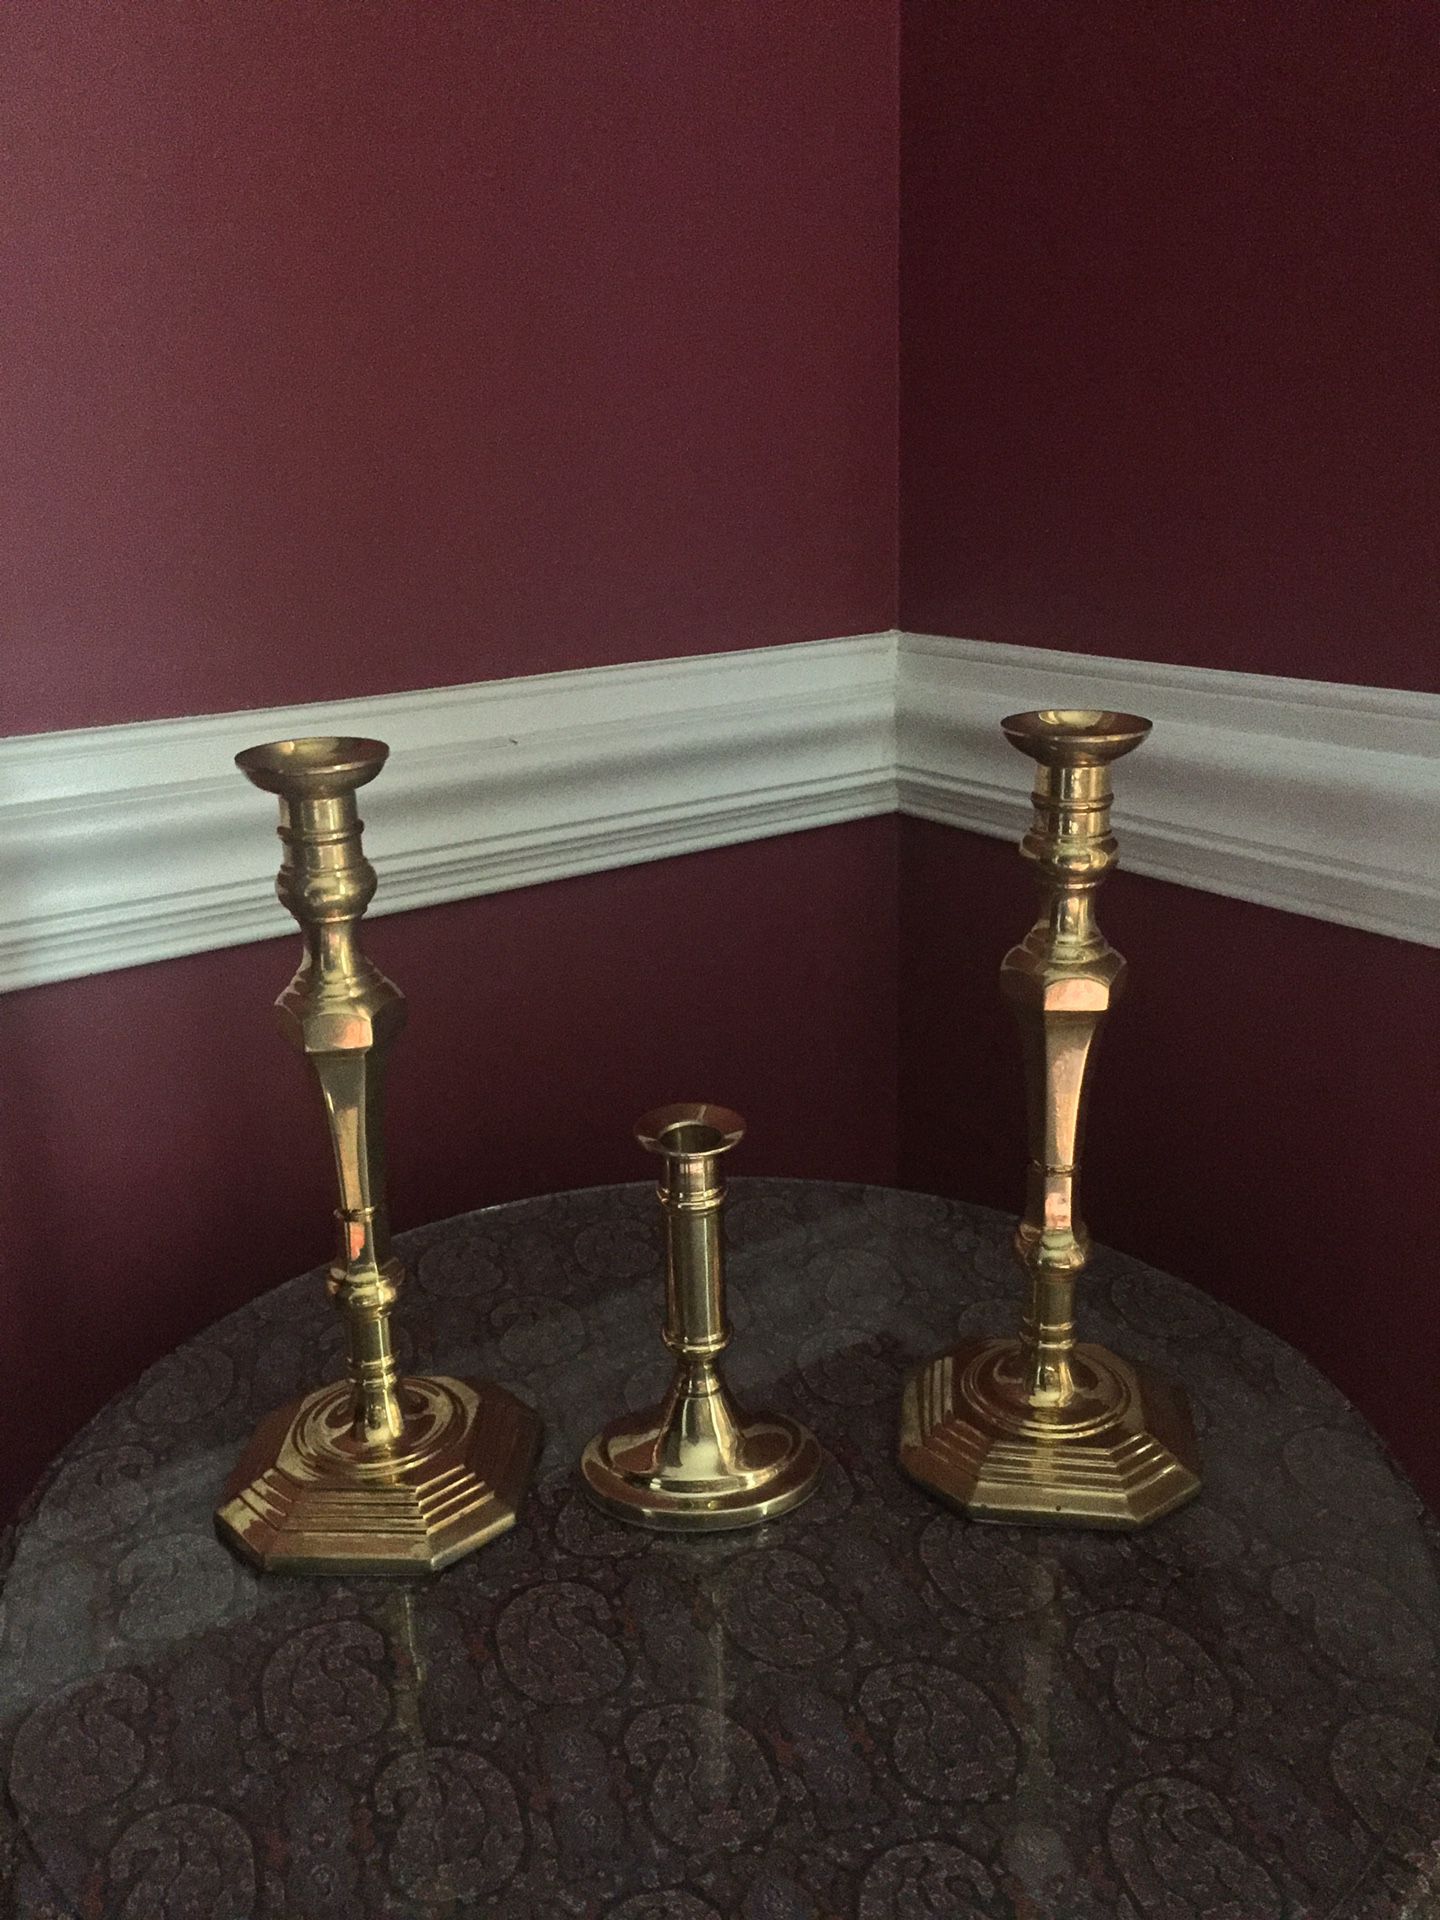 Bronze candle holders